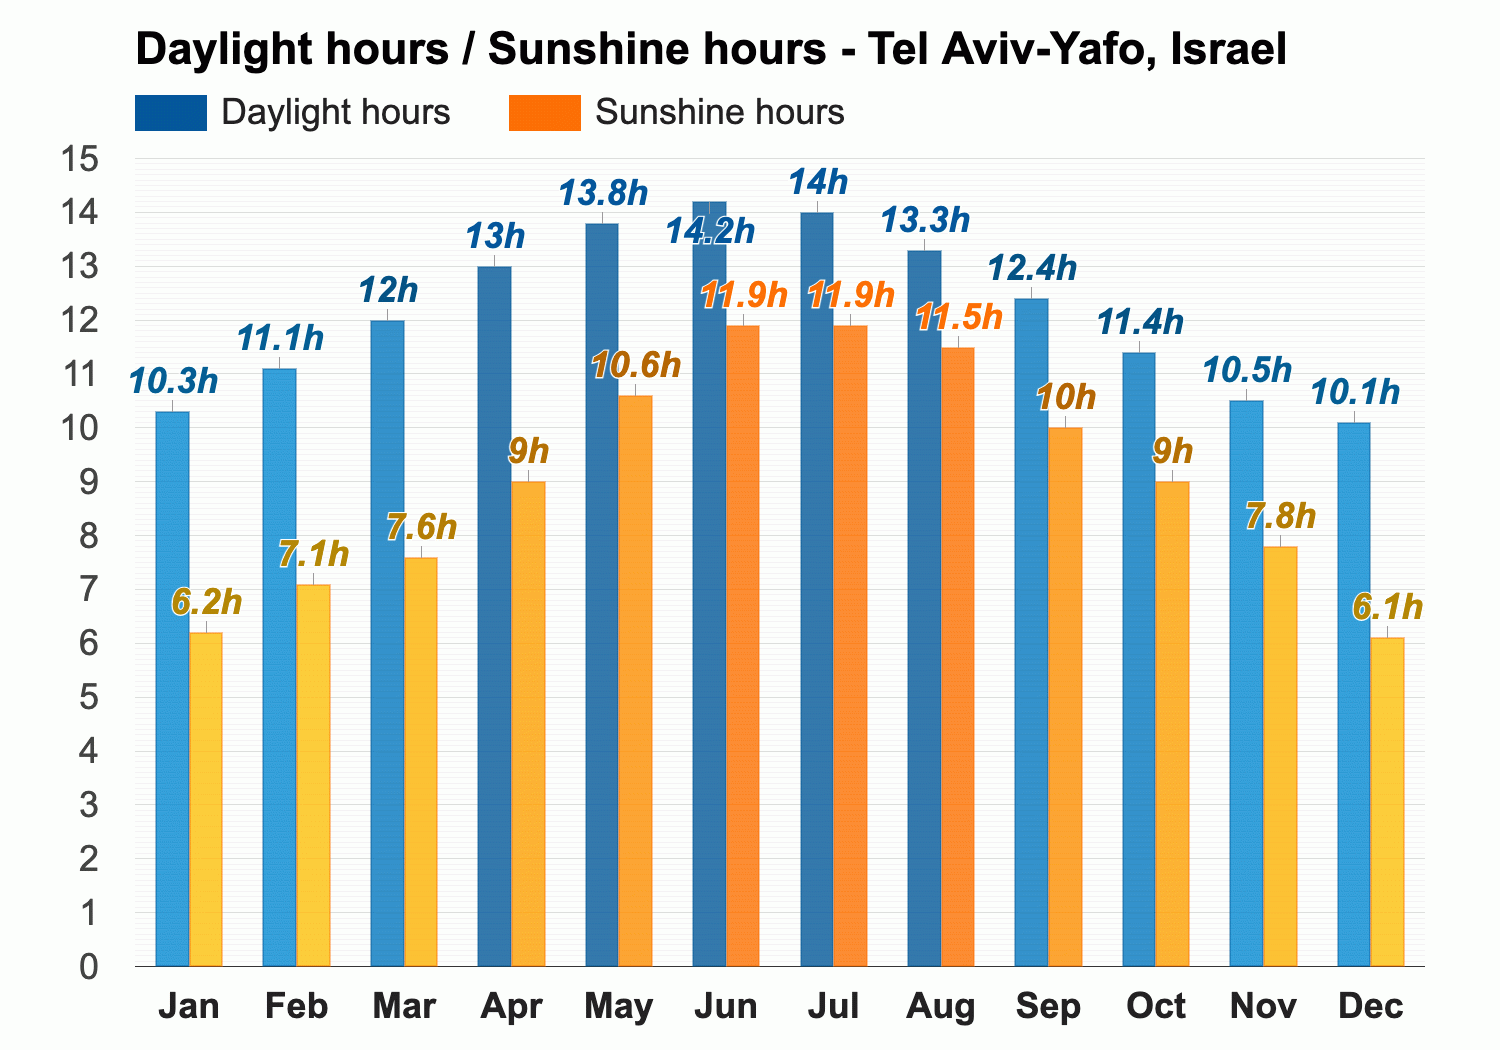 Yearly & Monthly weather - Tel Aviv-Yafo, Israel